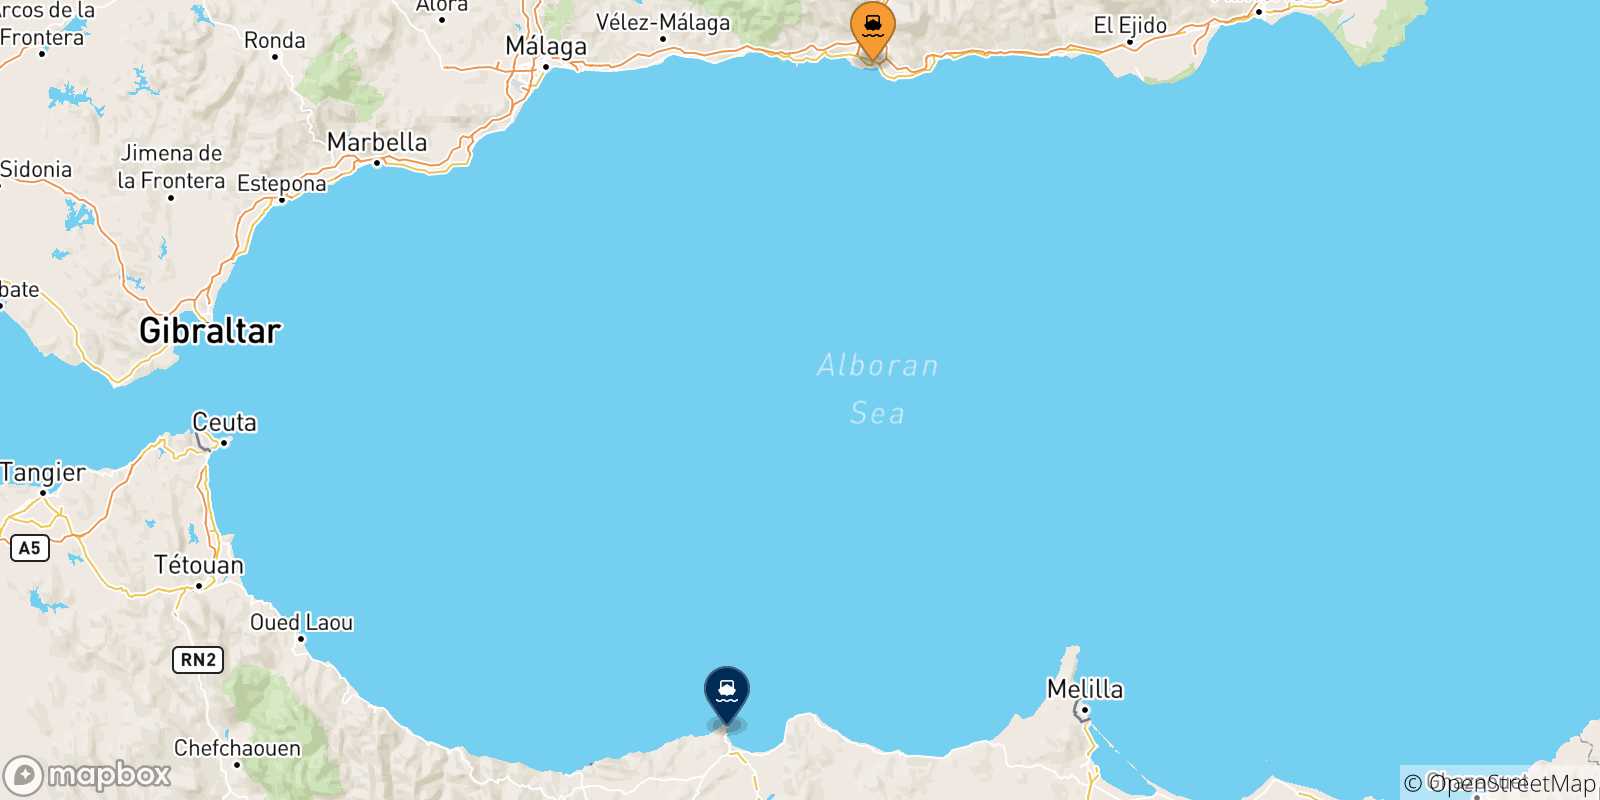 Map of the possible routes between Spain and Al Hoceima